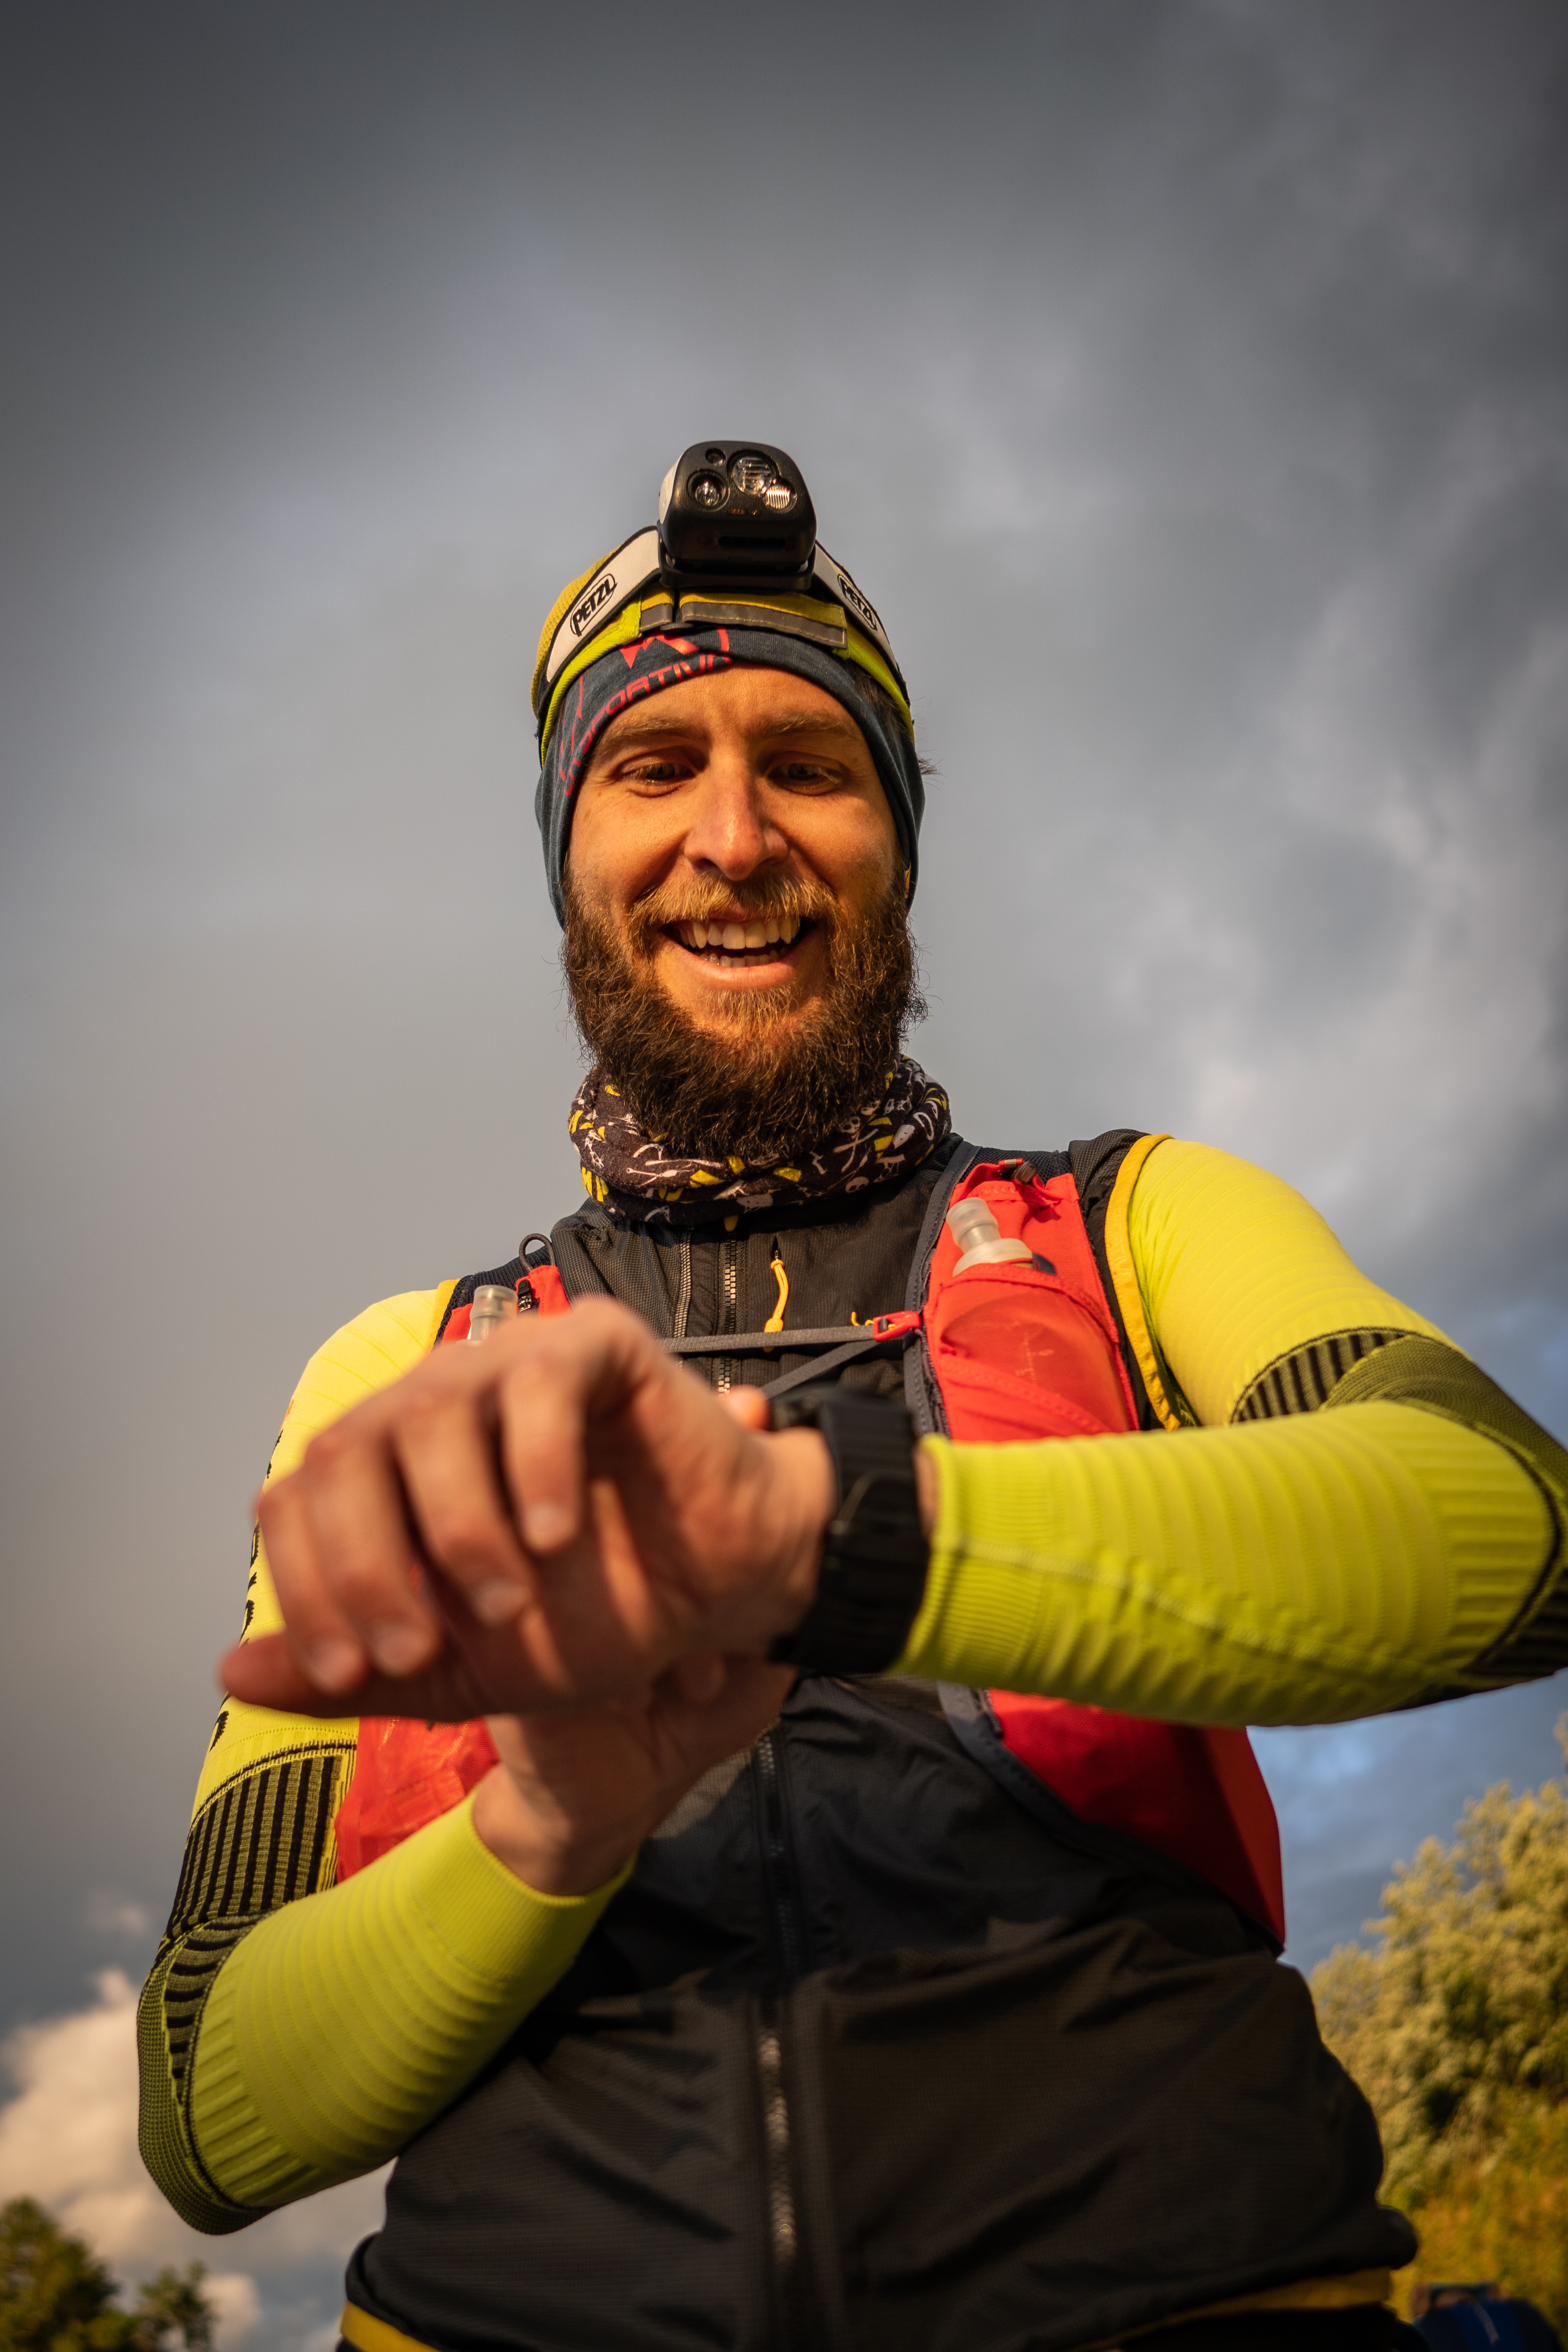 A trail runner smiling and looking at his watch